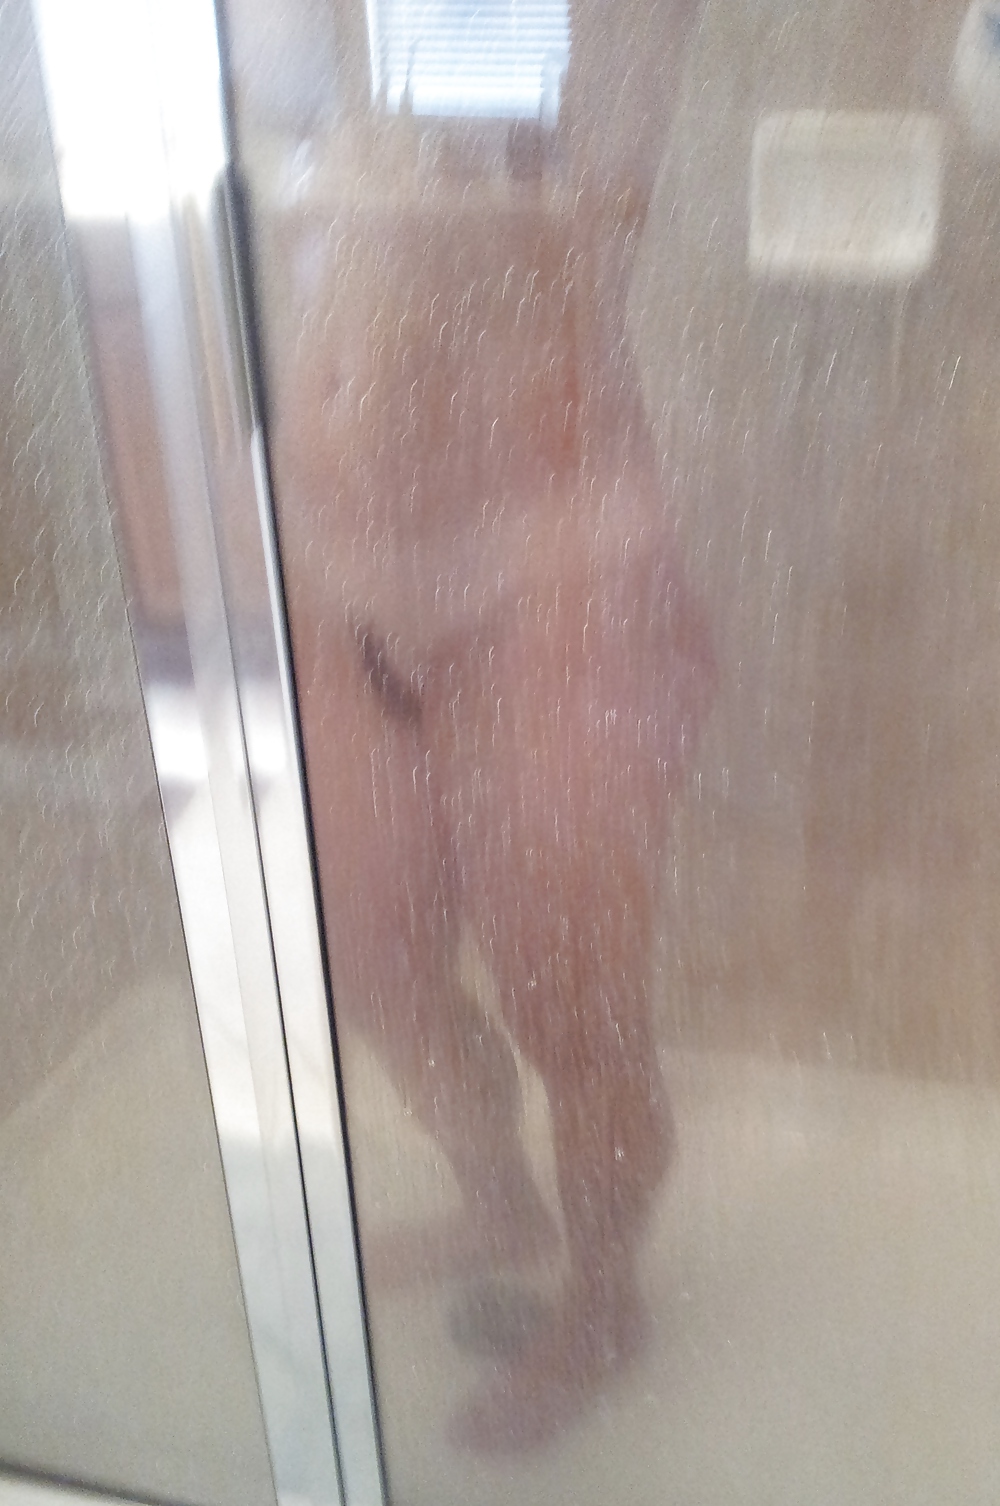 More shower photos of my wife 2 #20212961